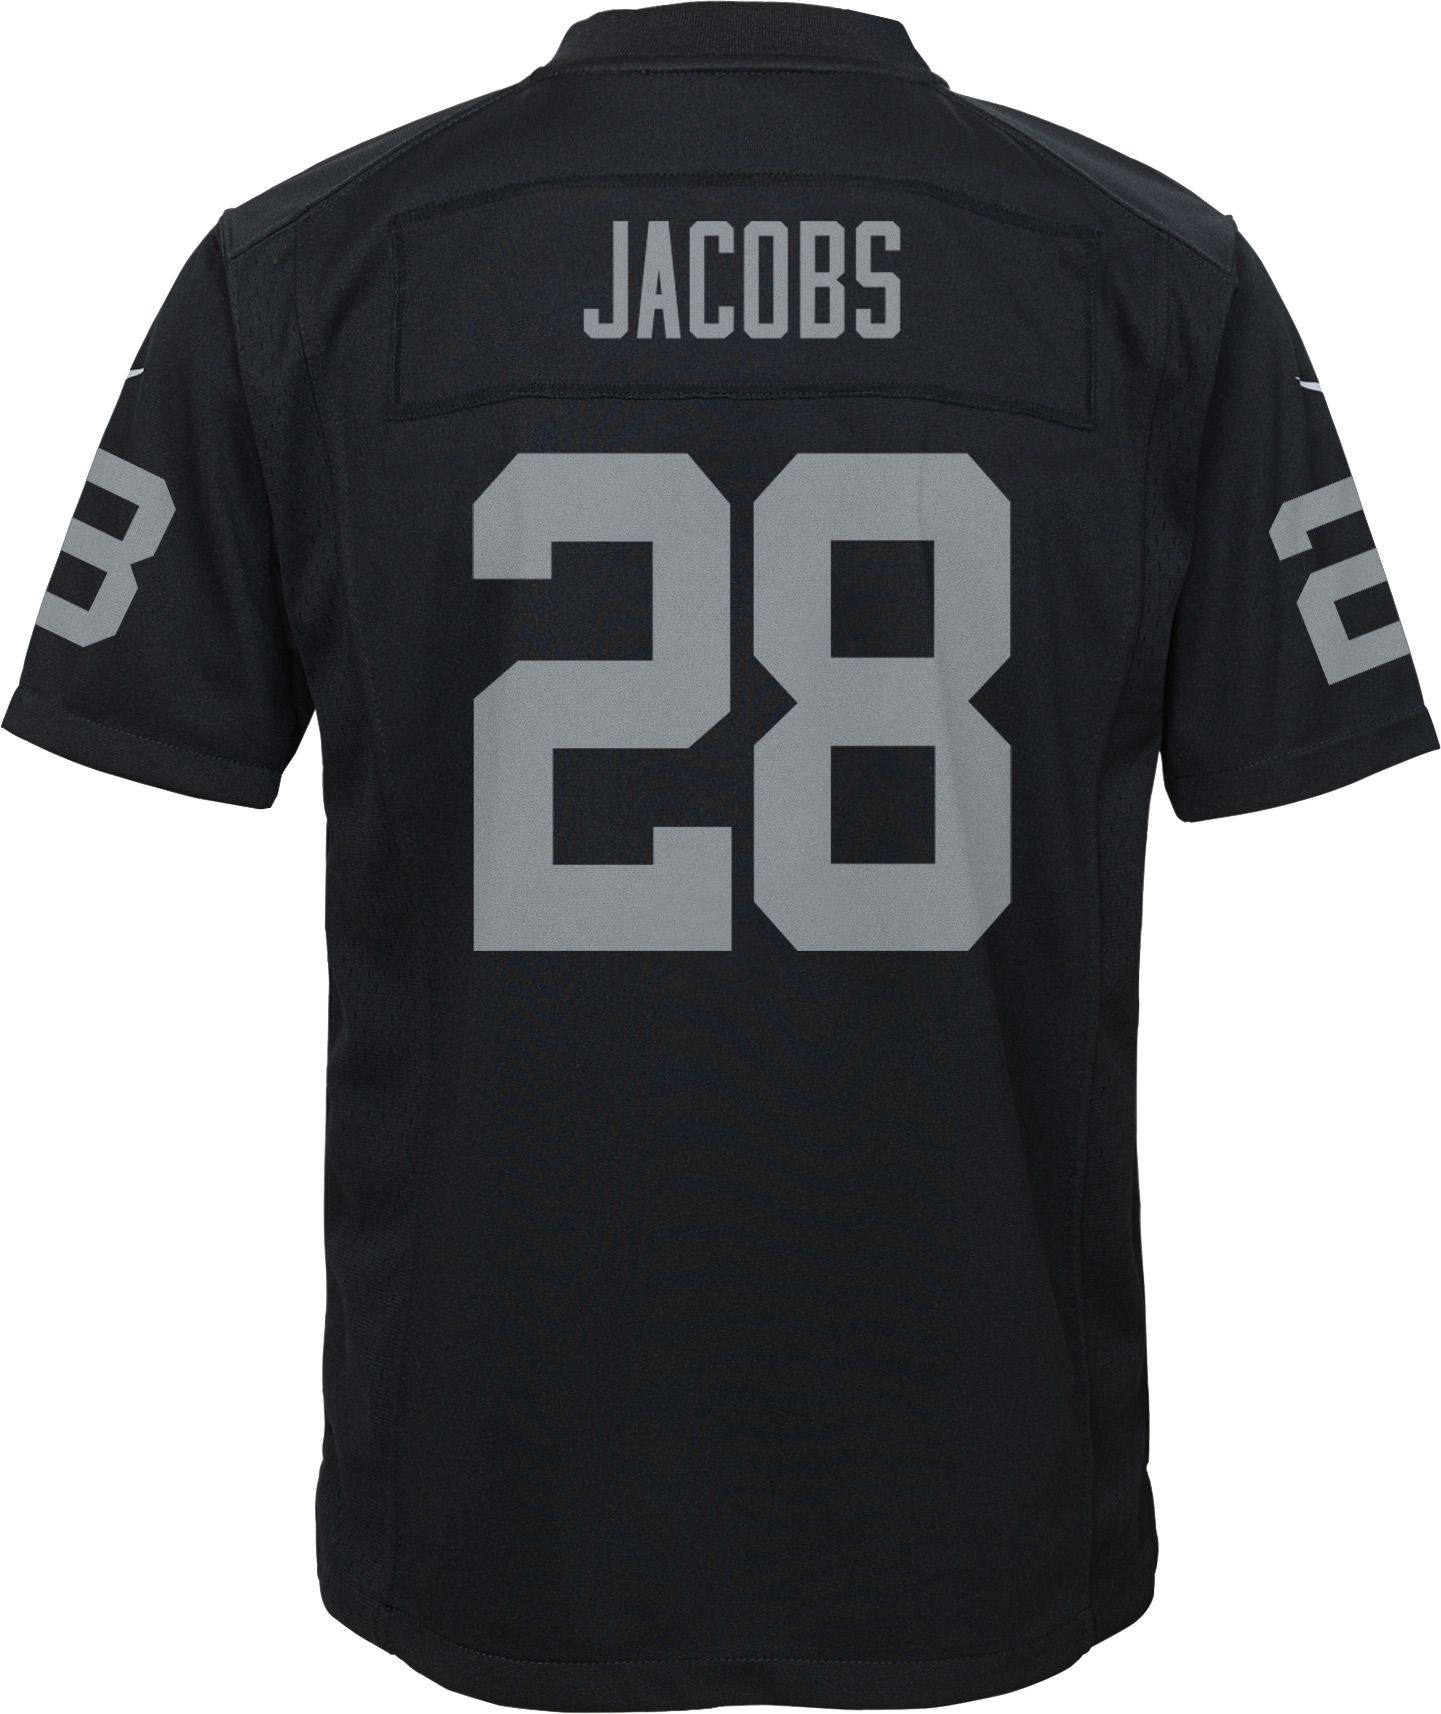 jacobs 28 jersey